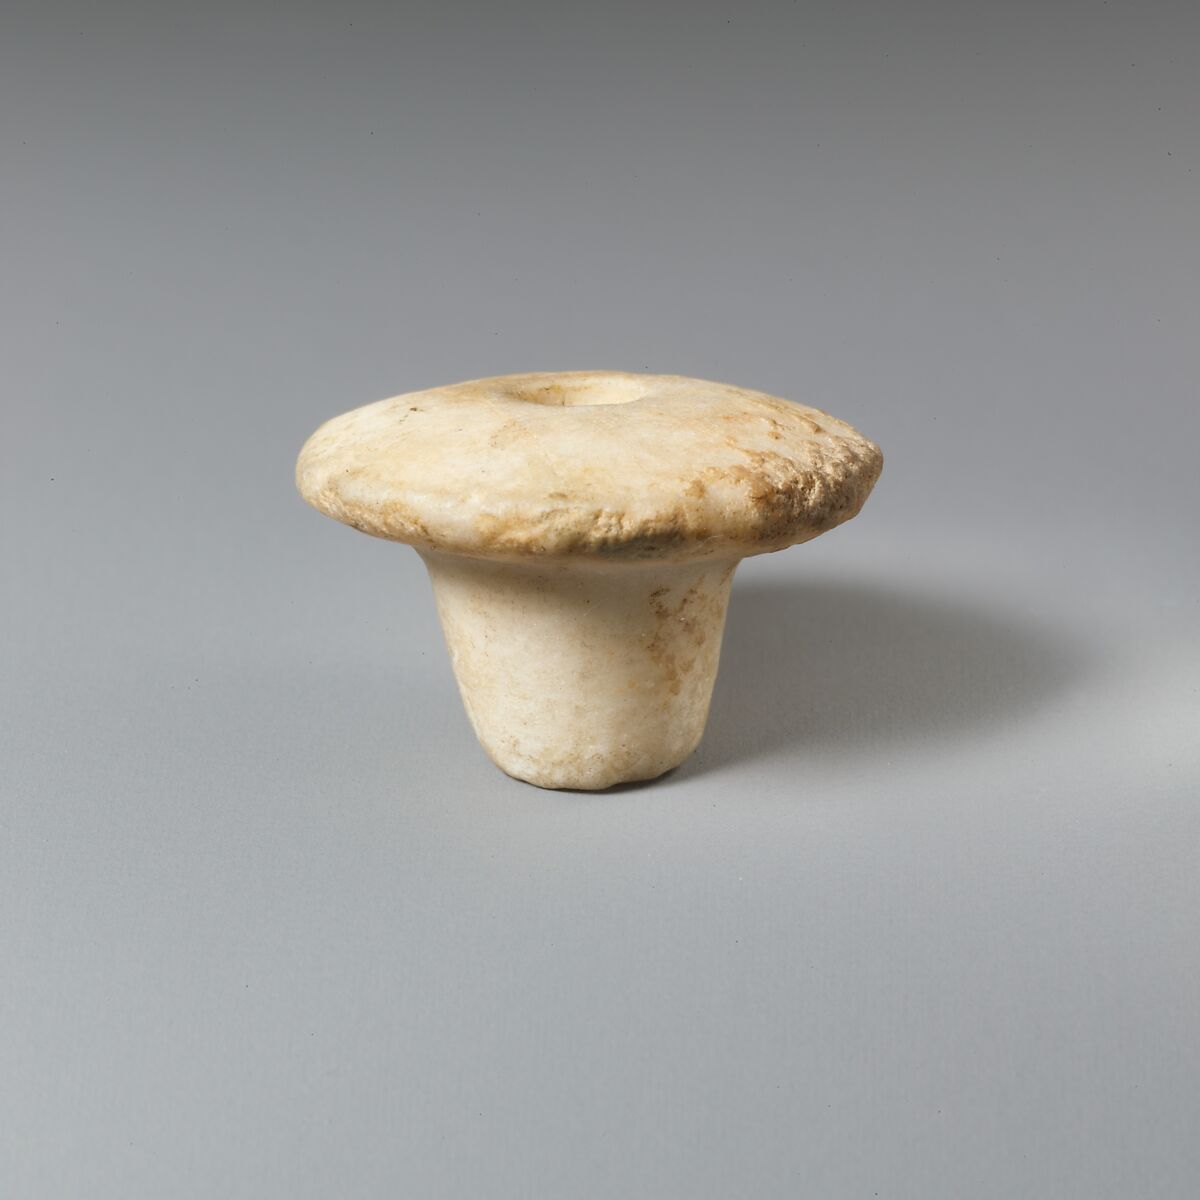 Ivory spindle whorl, Ivory ?, Minoan 